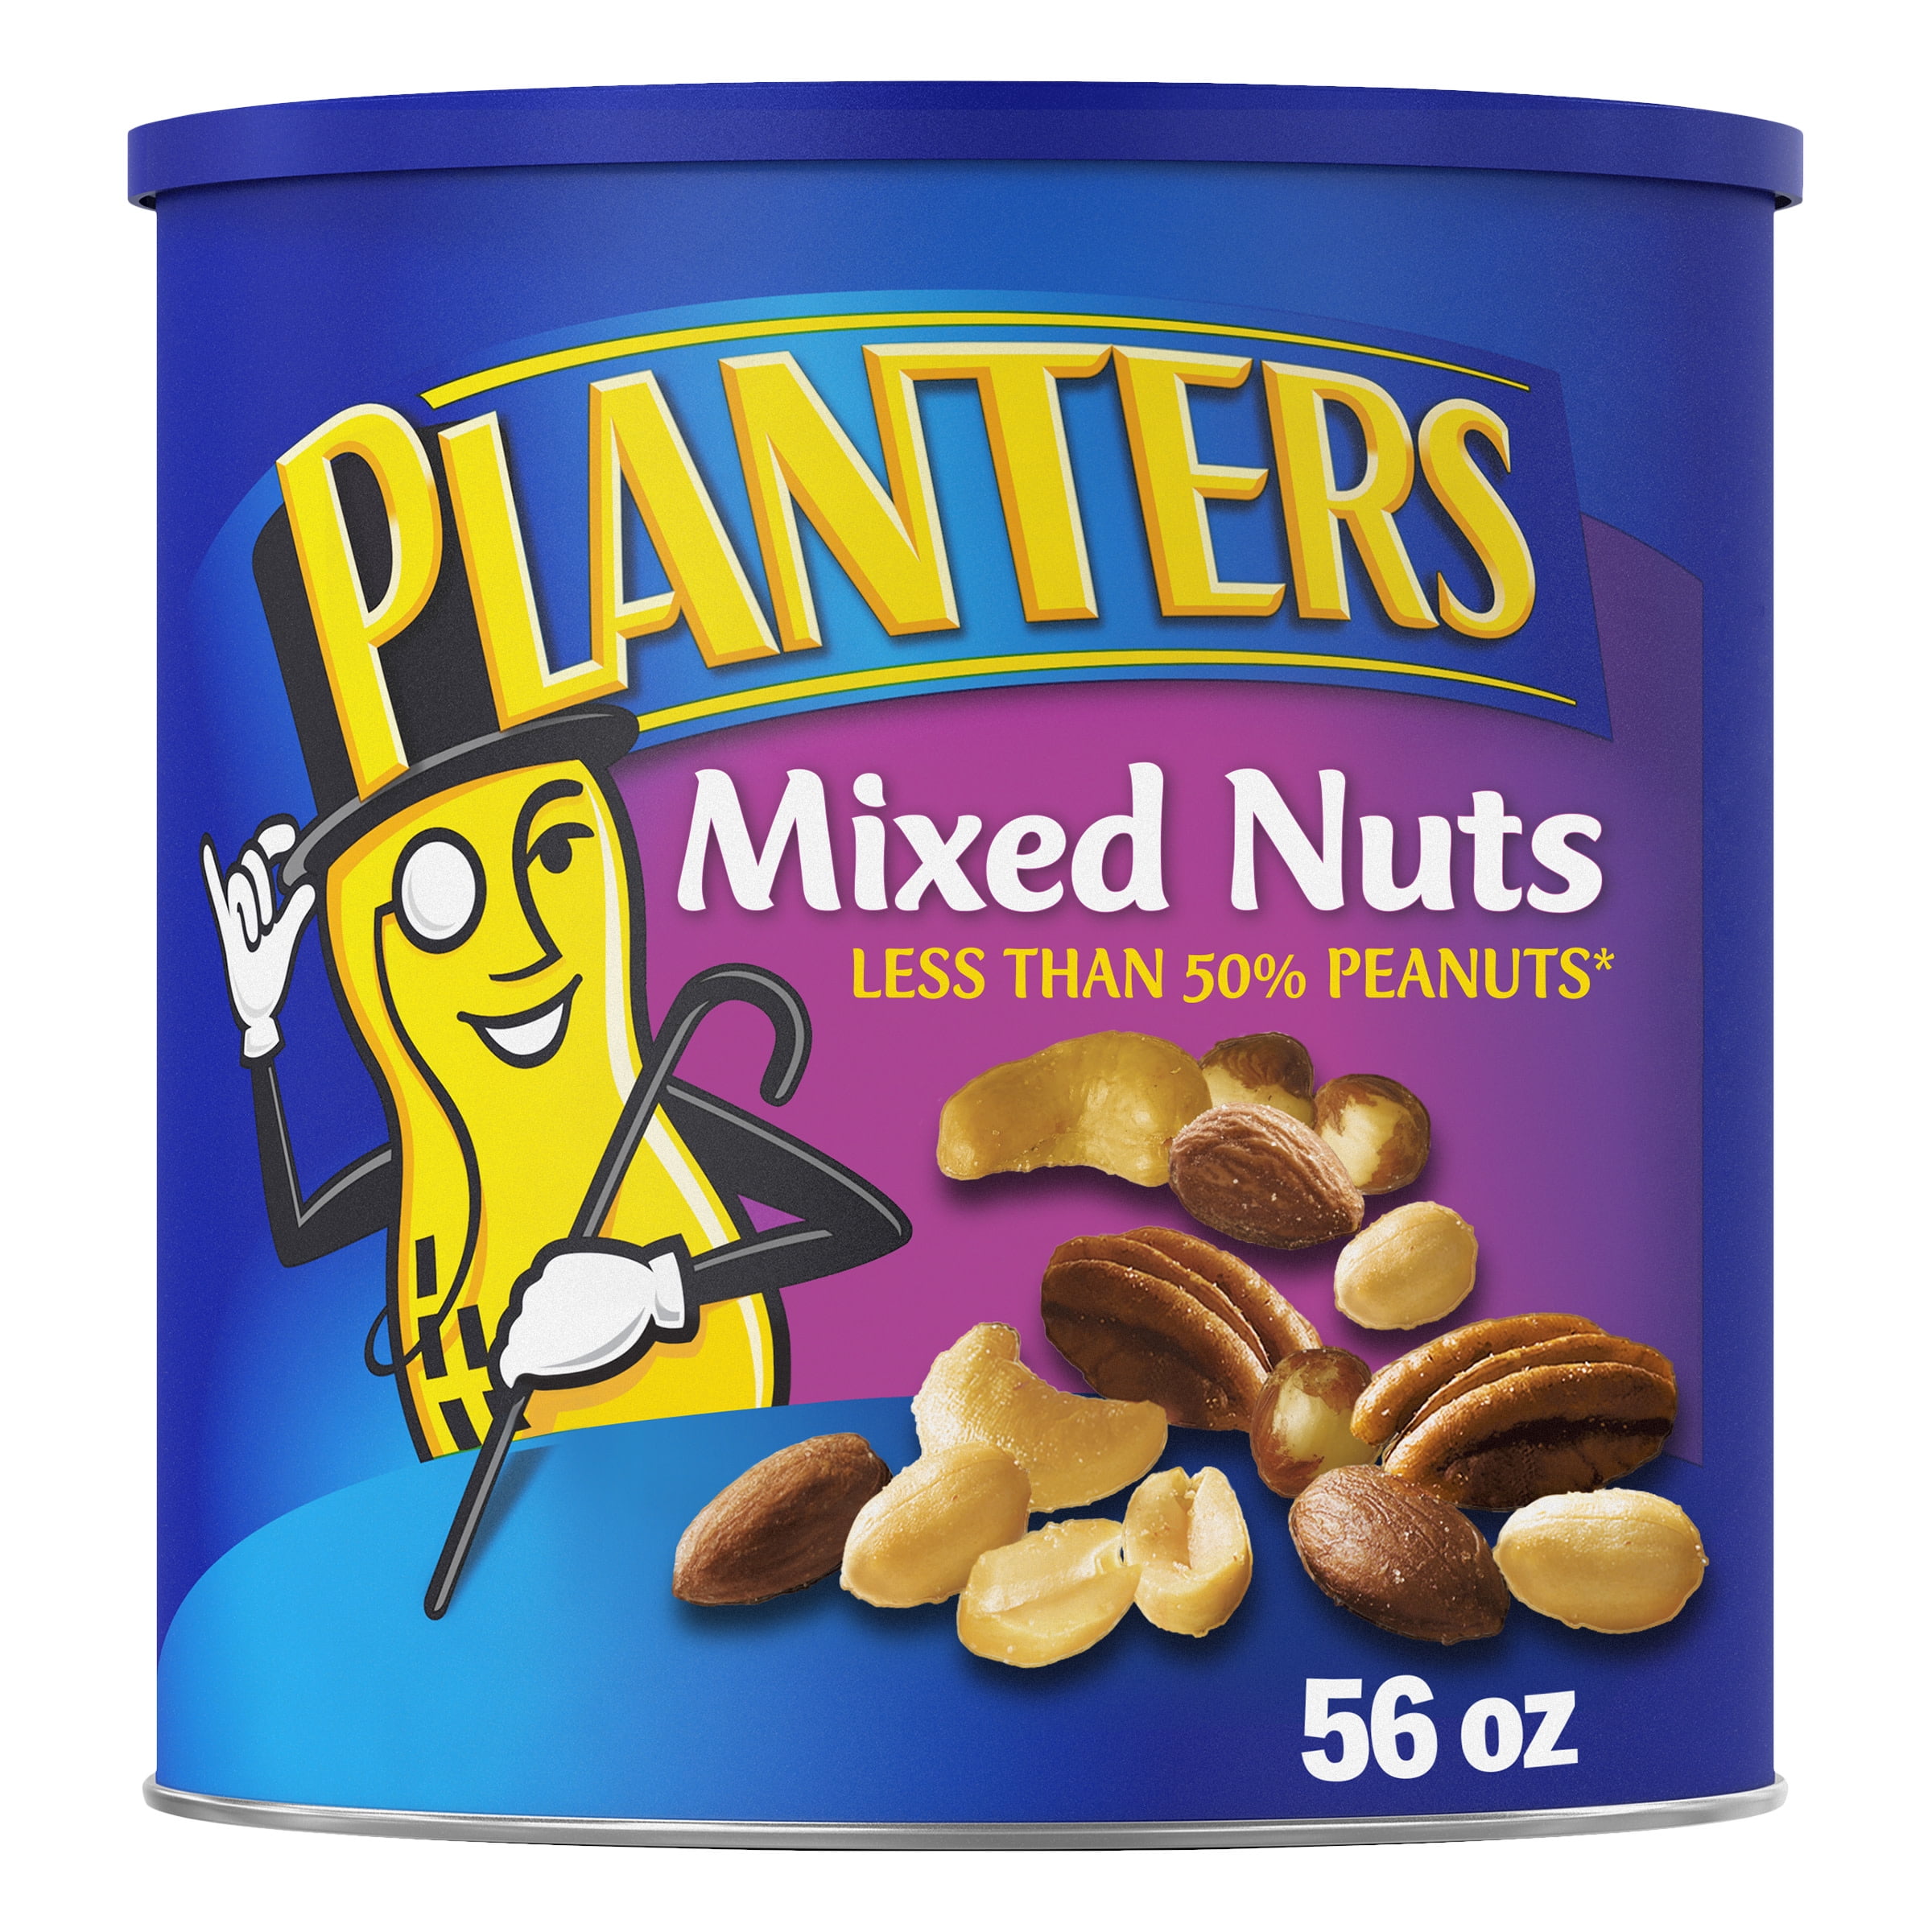 Planters Mixed Nuts Less Than 50% Peanuts with Peanuts, Almonds, Cashews, Hazelnuts, Pecans & Sea Salt, 3.5 lb Canister